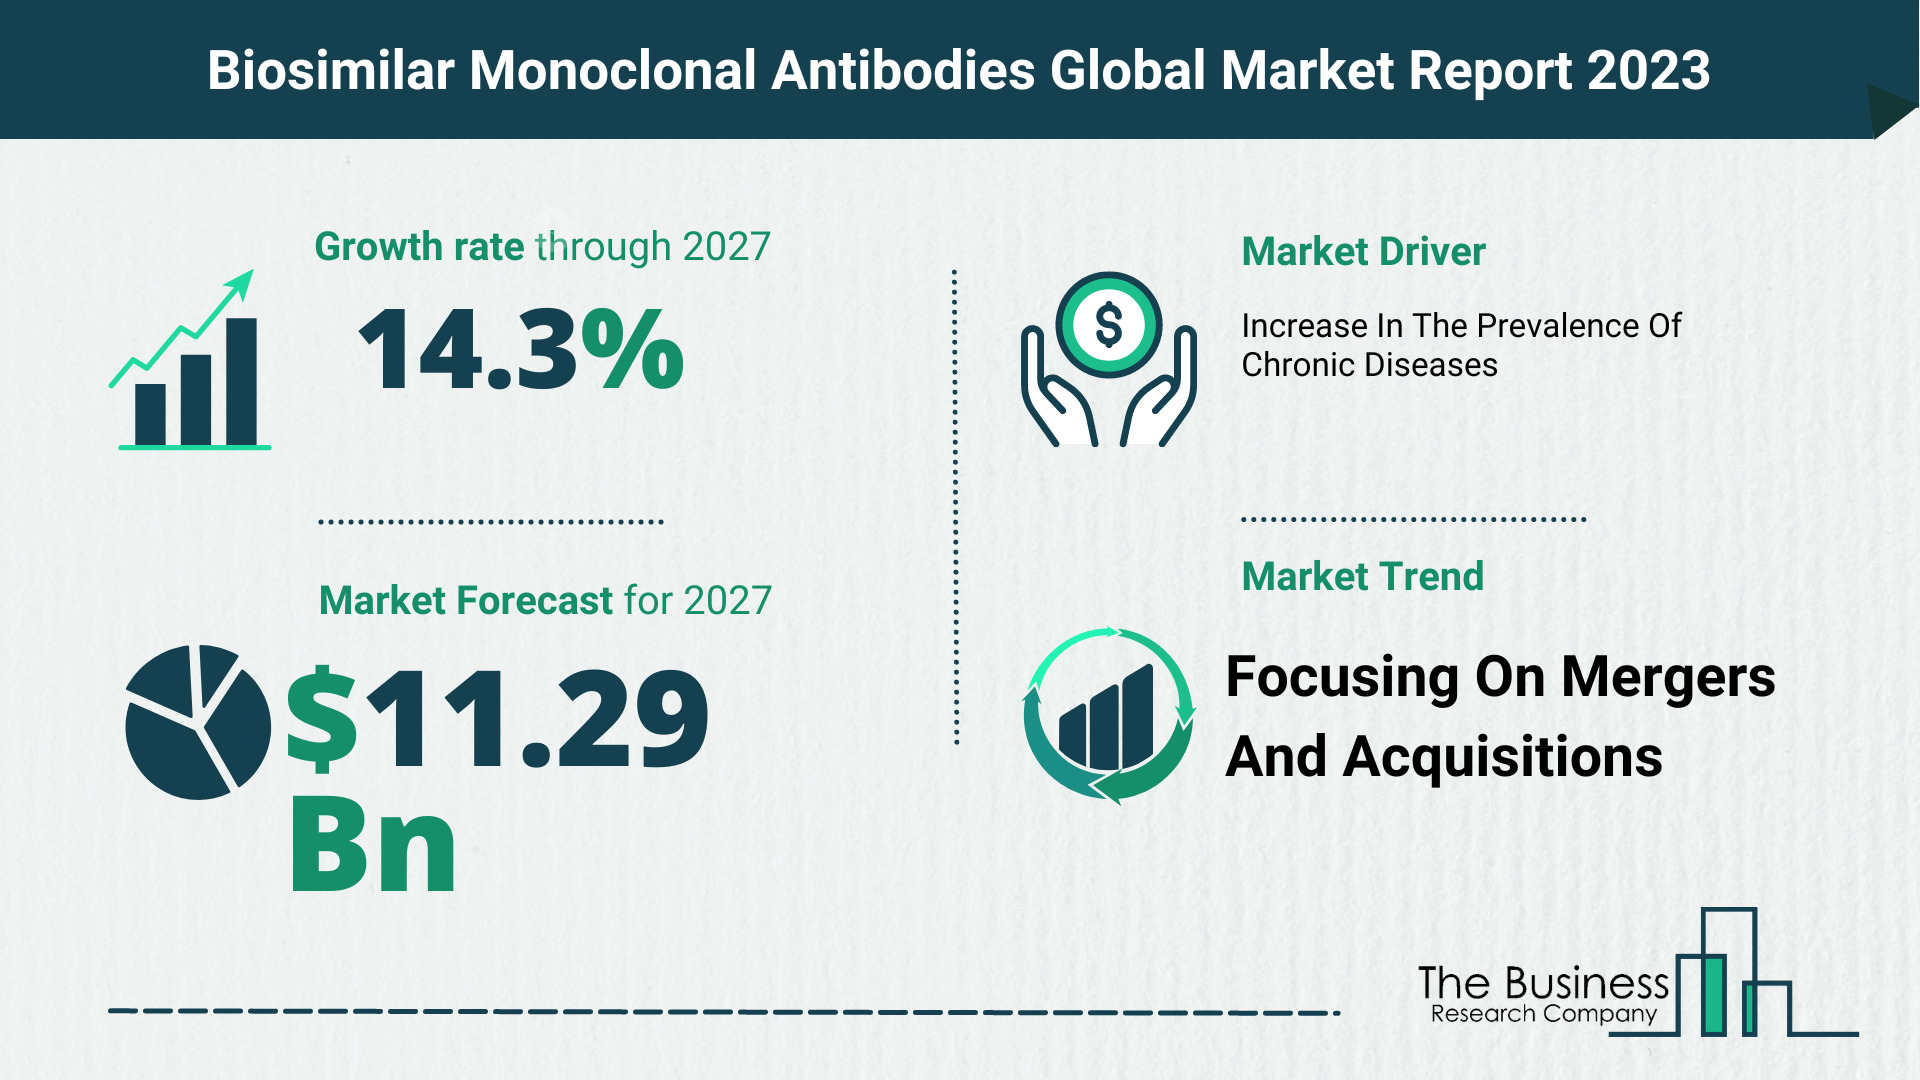 How Will The Biosimilar Monoclonal Antibodies Market Globally Expand In 2023?